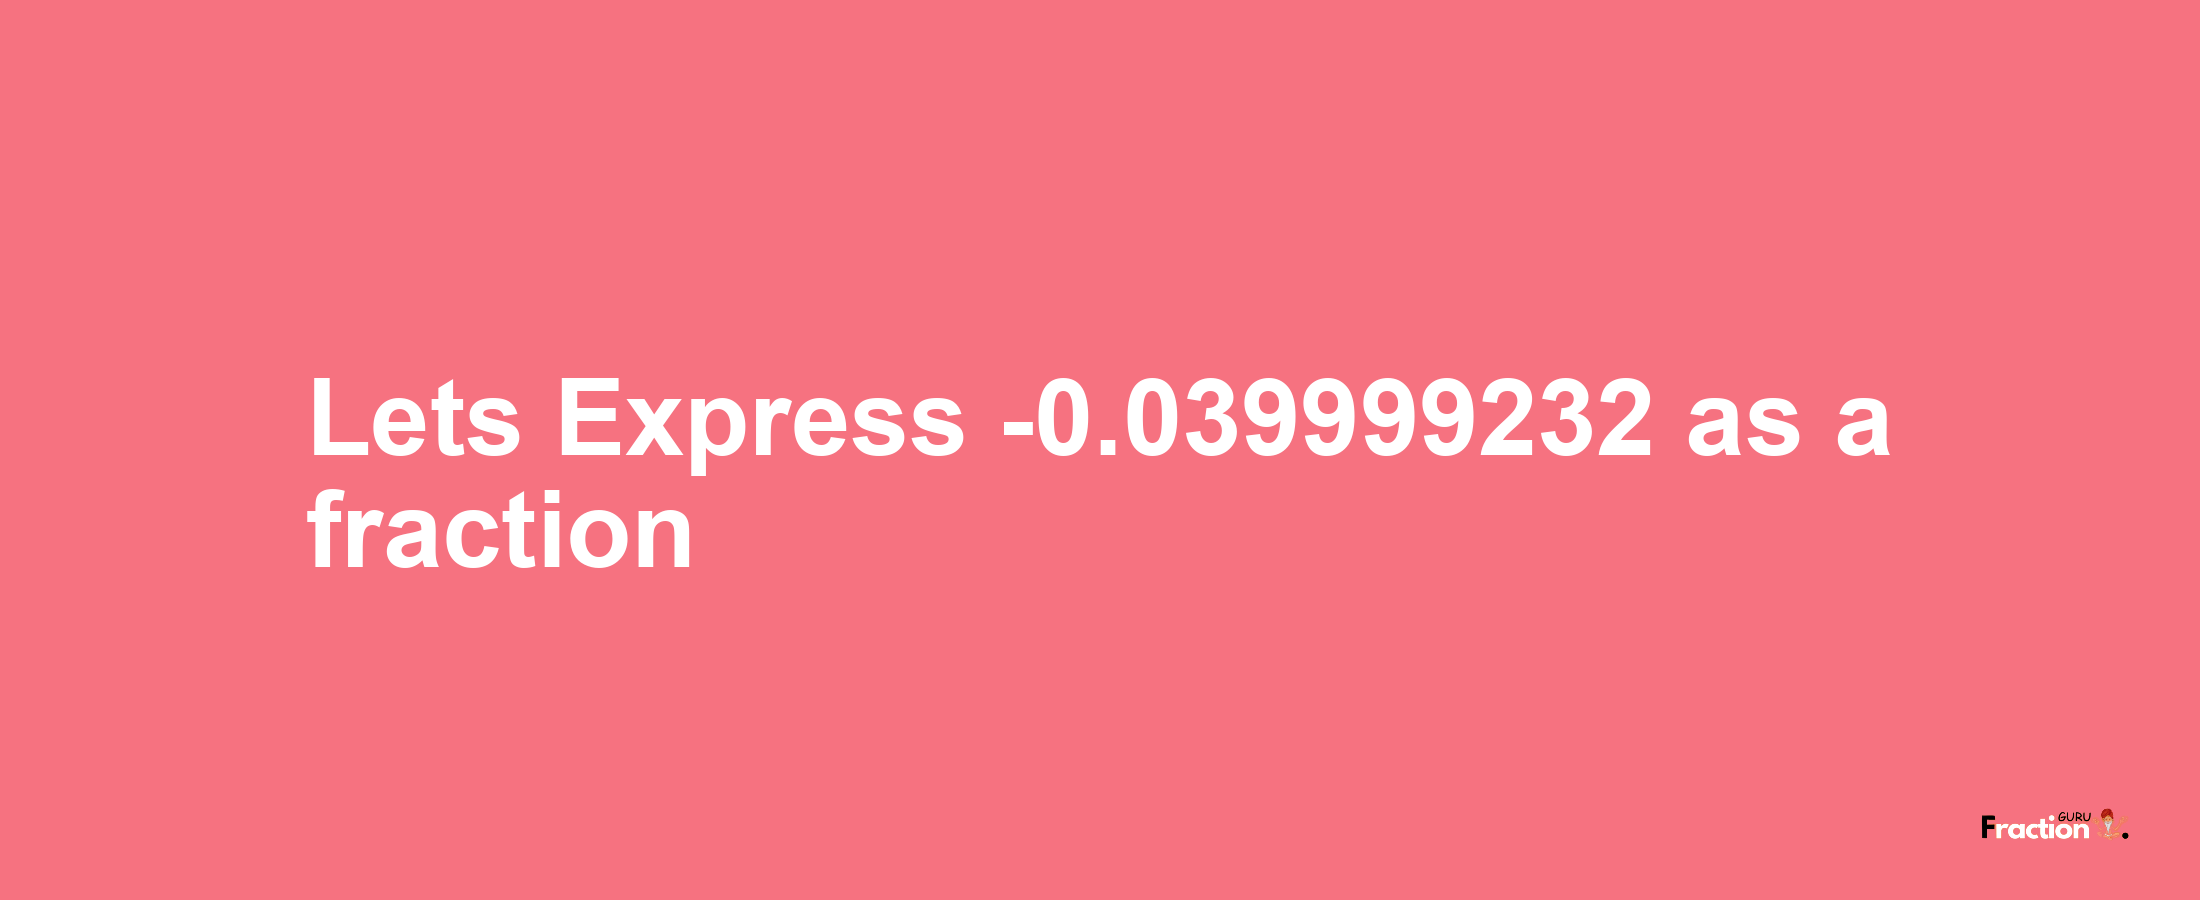 Lets Express -0.039999232 as afraction